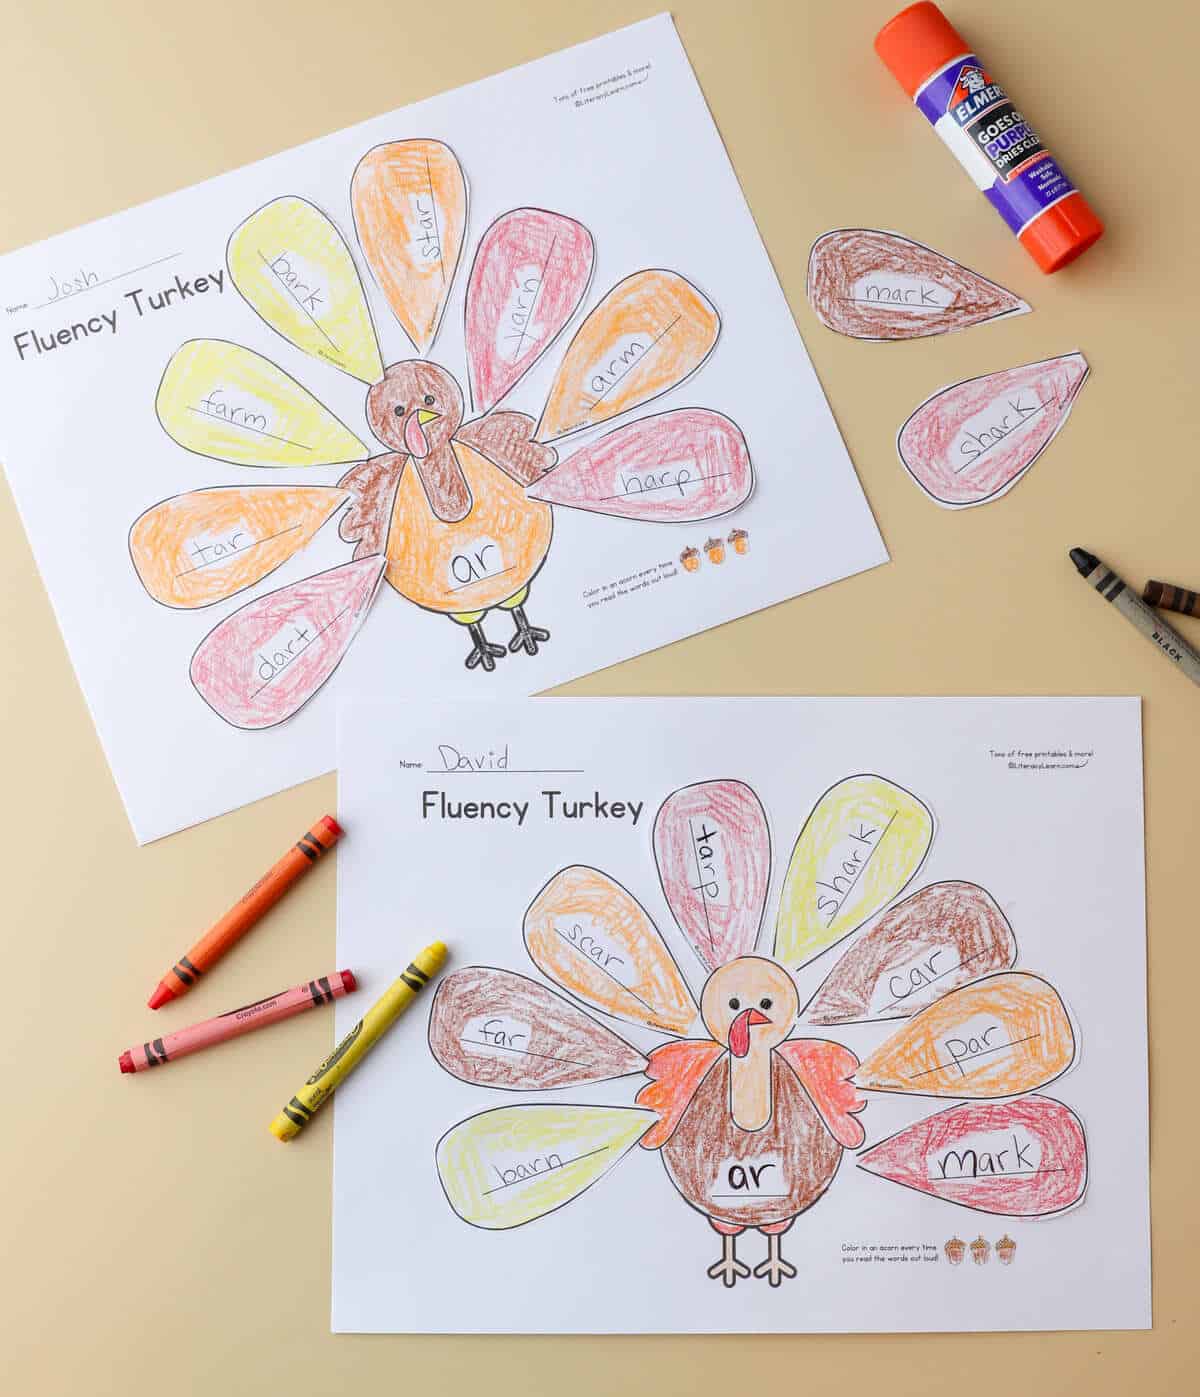 Two printed and completed fluency turkey worksheets with crayons.